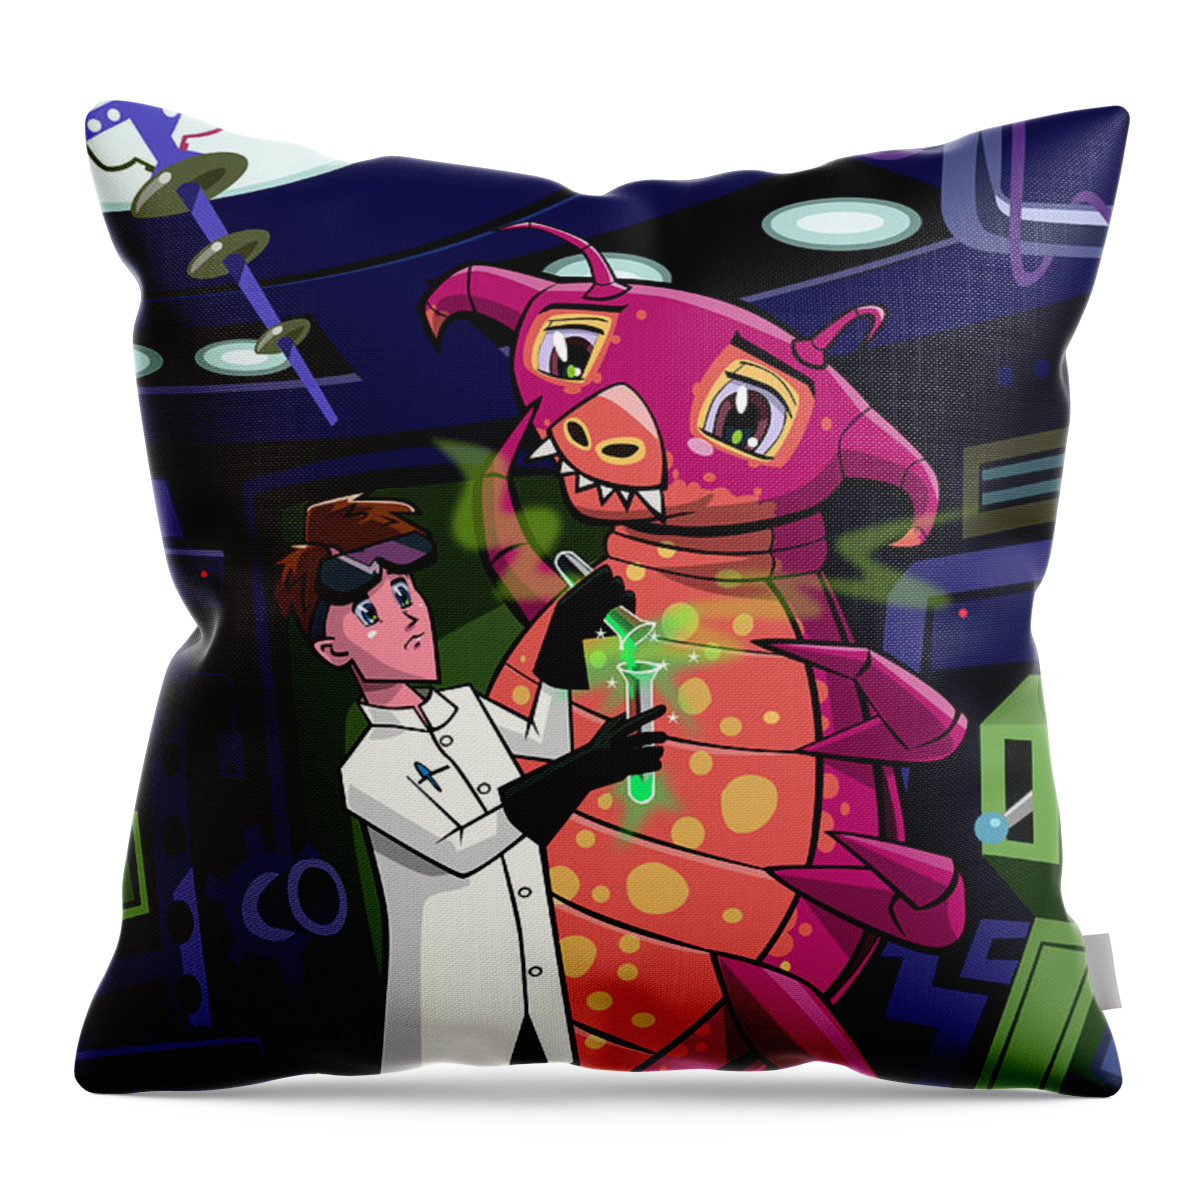 Professor Throw Pillow featuring the digital art Manga professor with nice Pink Monster Experiment by Martin Davey